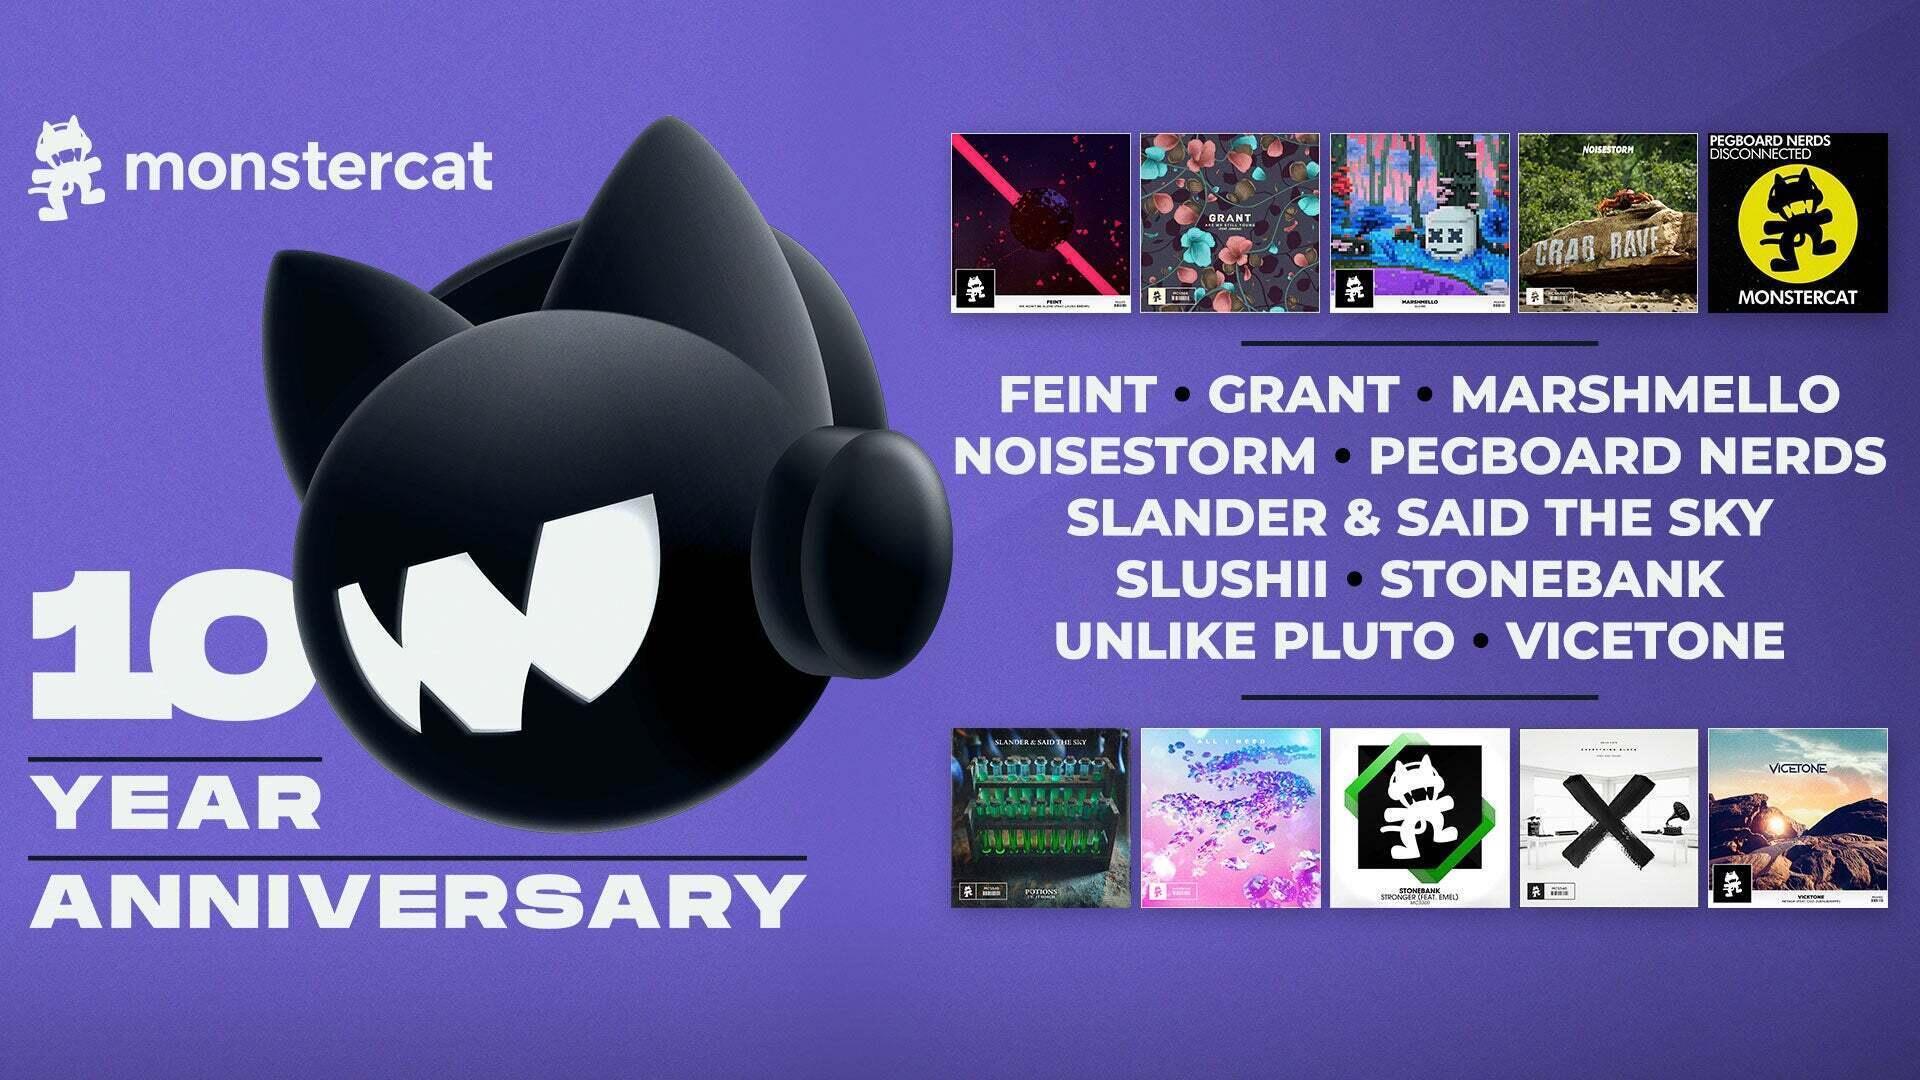 Astro Arcade: Monstercat continues 10-year anniversary celebration with Monstercat 10 YR Fan Pack in partnership with Rocket League